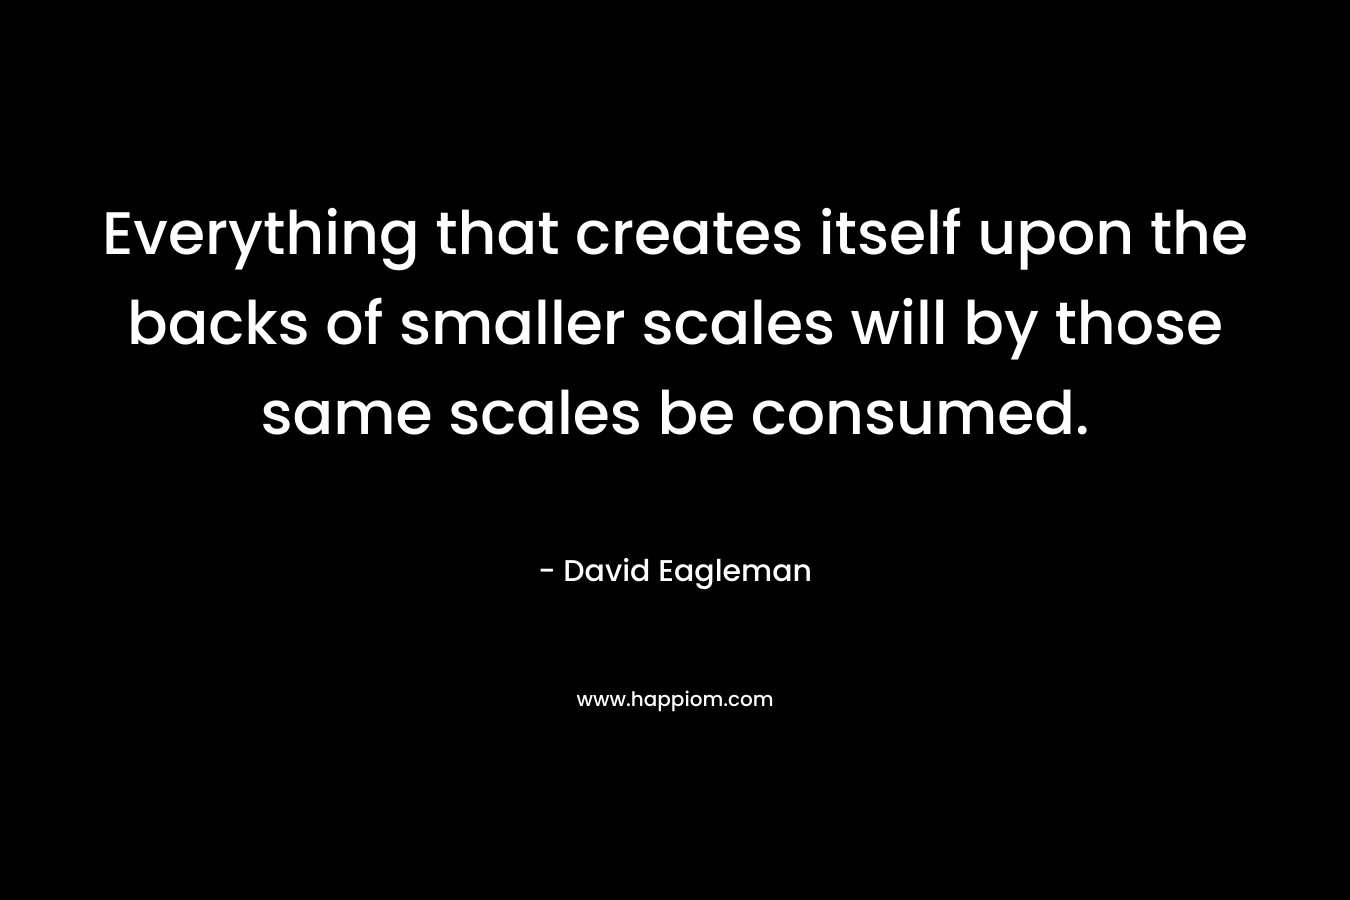 Everything that creates itself upon the backs of smaller scales will by those same scales be consumed. – David Eagleman